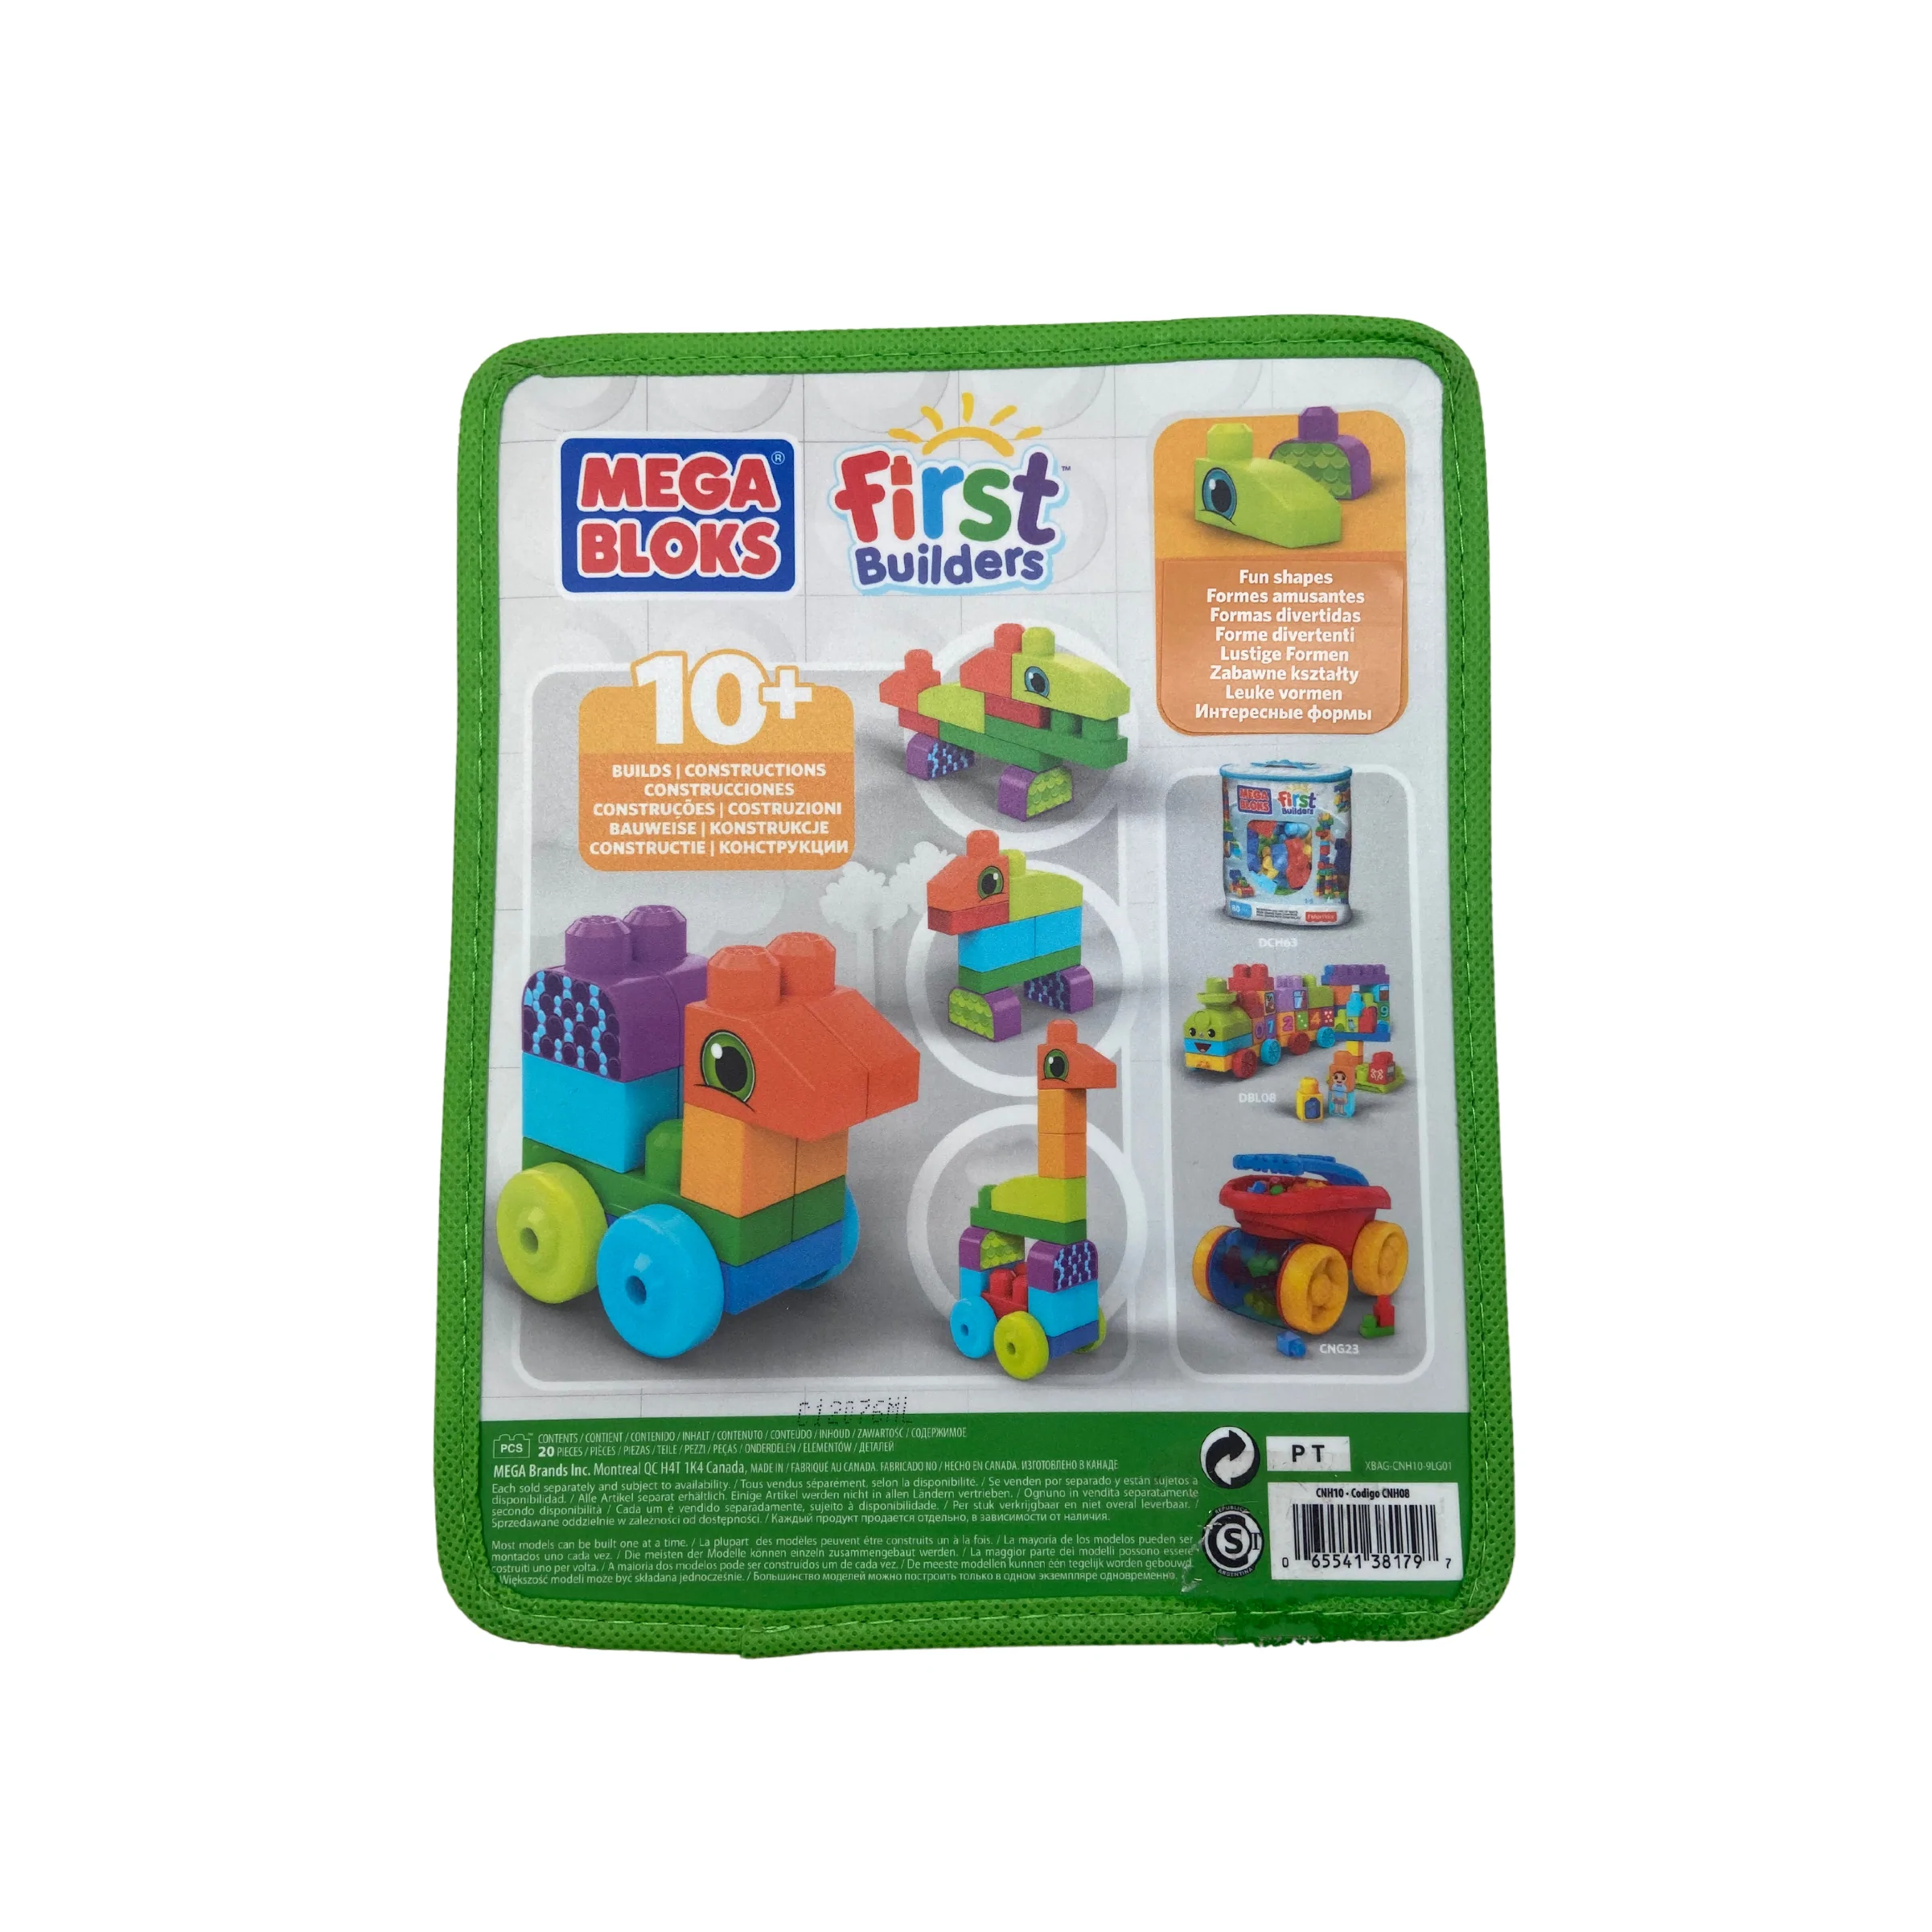 Fisher Price: Mega Bloks / First Builders / 20 Piece / Ages 1-5